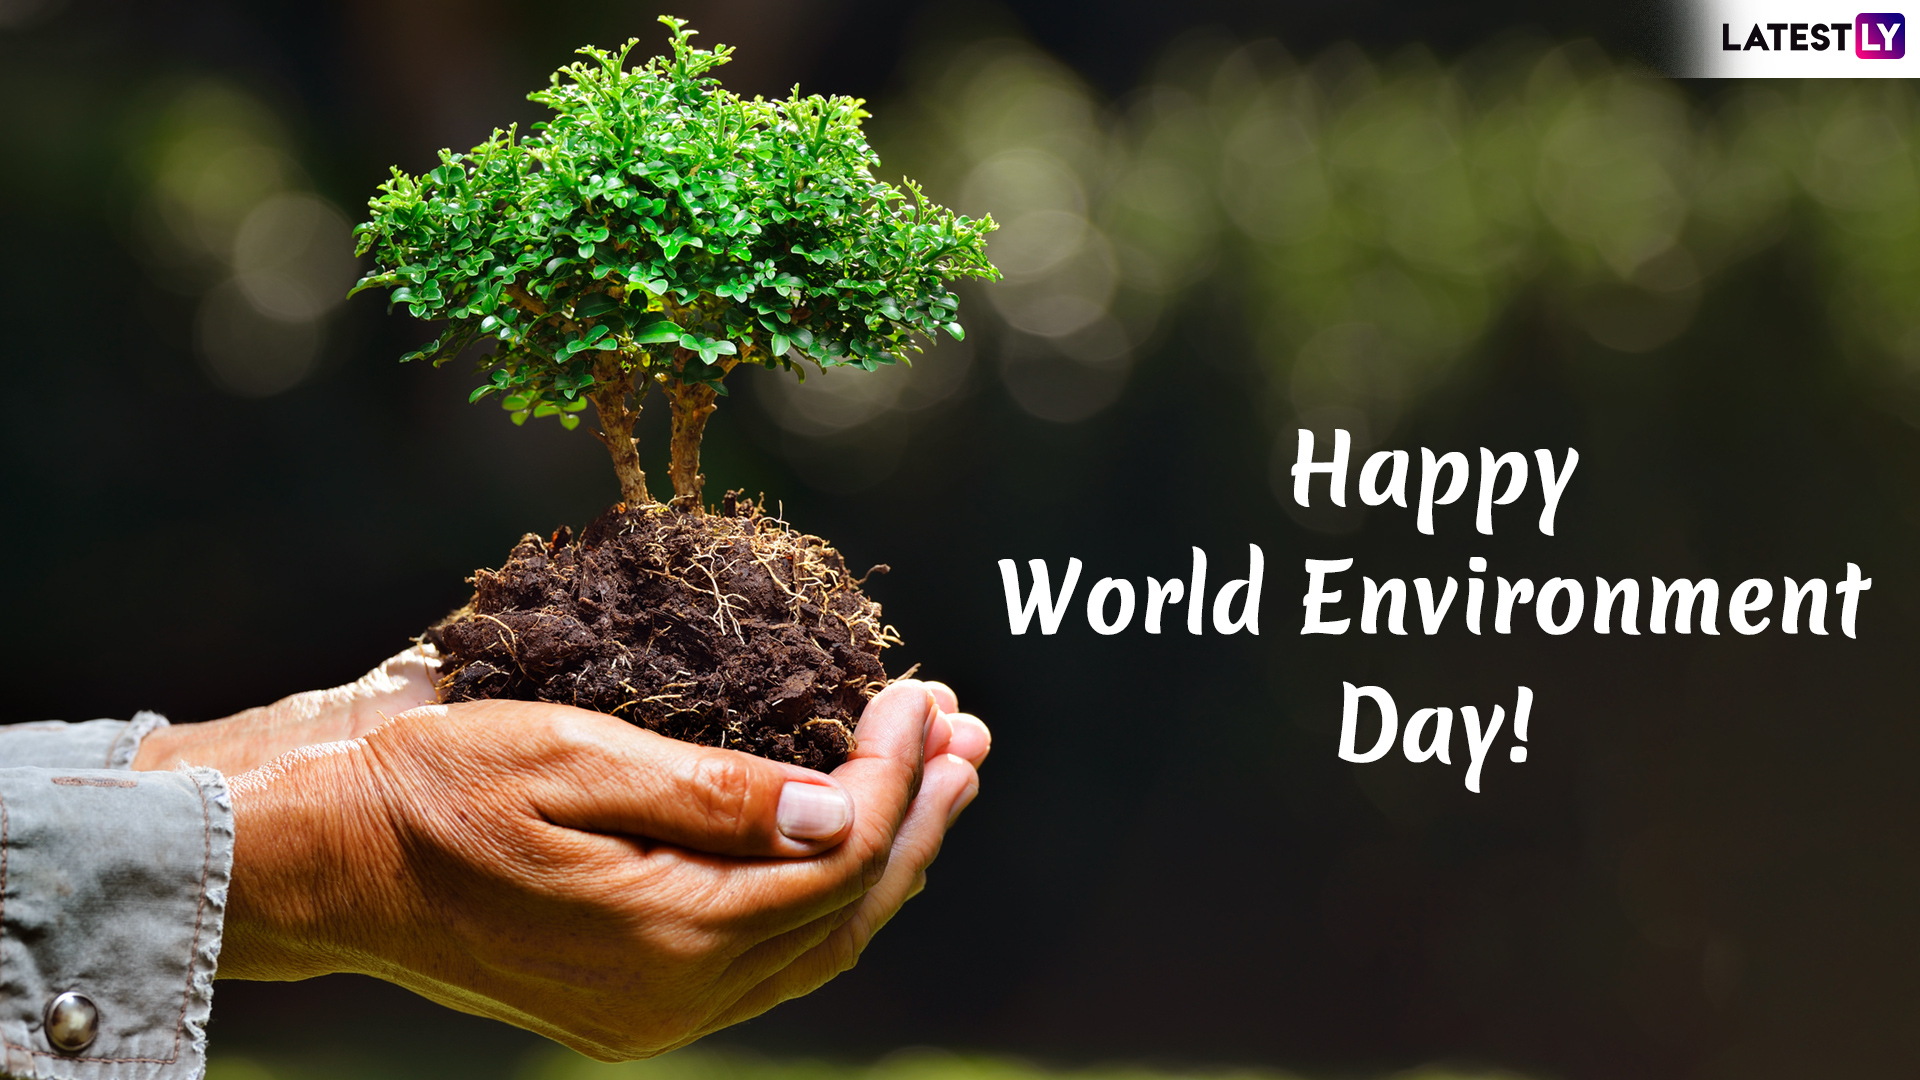 Happy World Environment Day 2020 Quotes and WED Wishes: WhatsApp Stickers,  Slogans, GIF Images, SMS and Messages to Wish Everyone on Vishwa Paryavaran  Diwas! | 🙏🏻 LatestLY